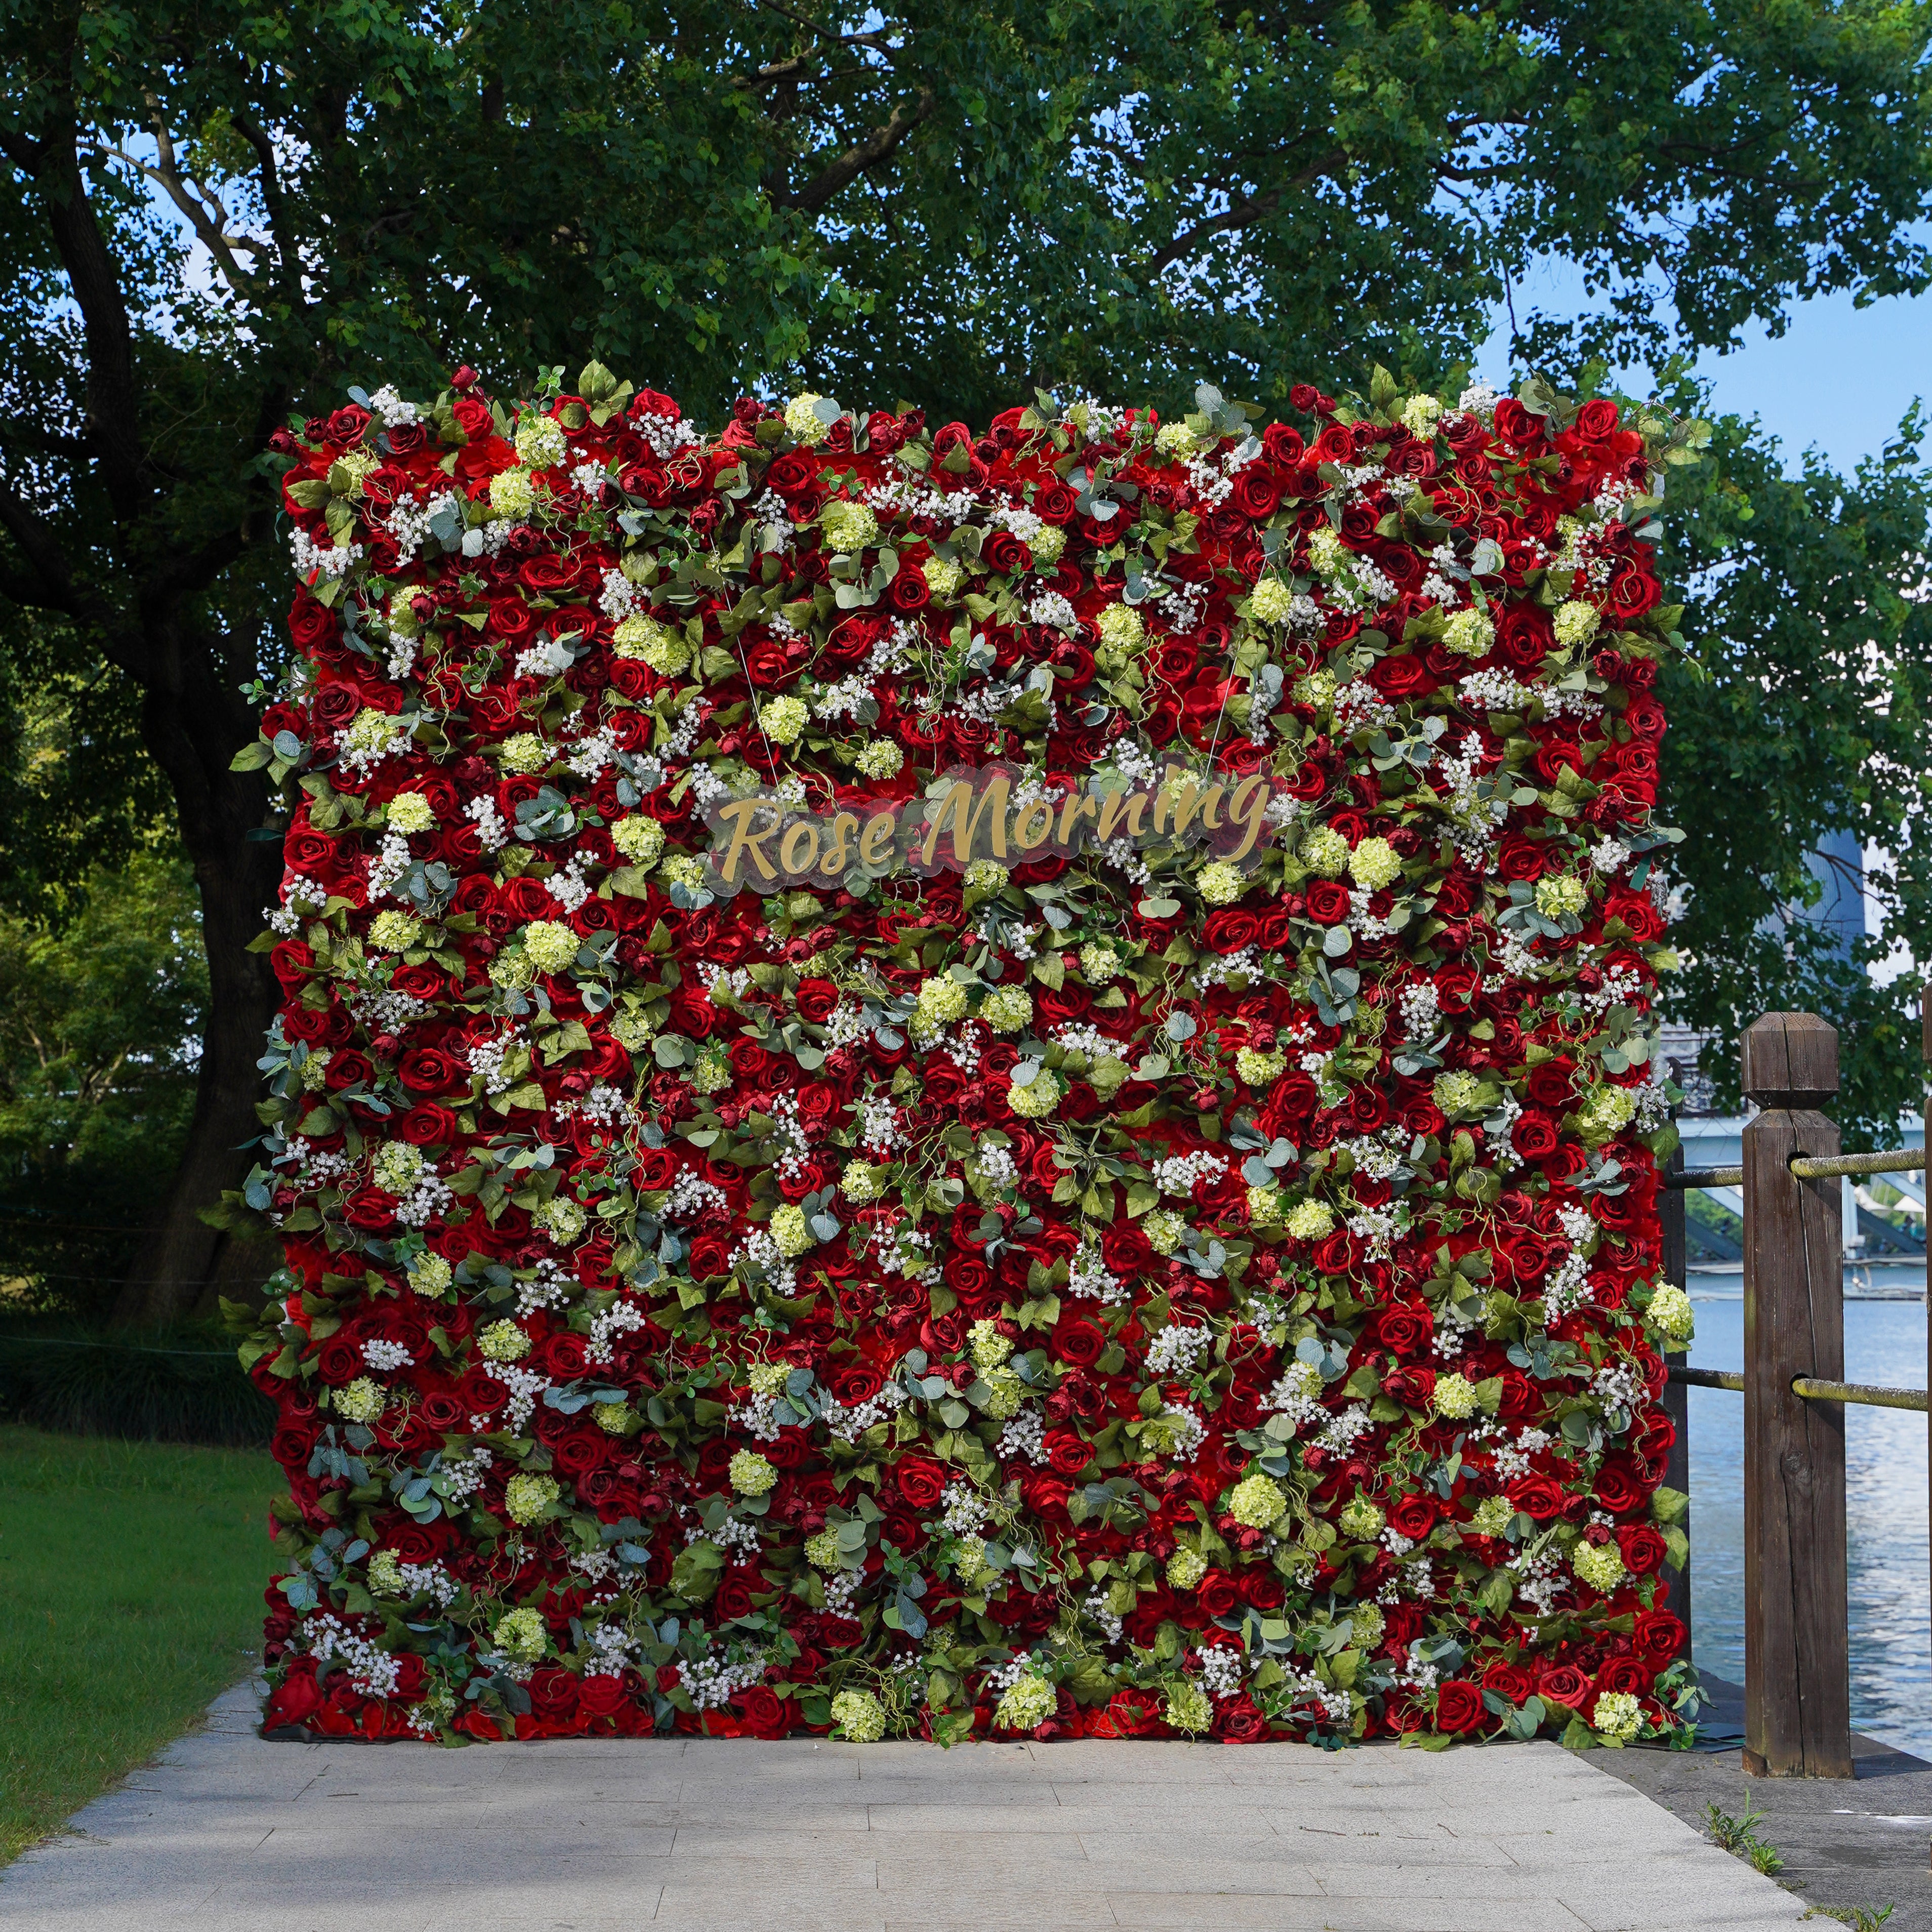 Lora: 3D Fabric Artificial Flower Wall Rolling Up Curtain Flower Wall R785 - 8ft*8ft Rose Morning